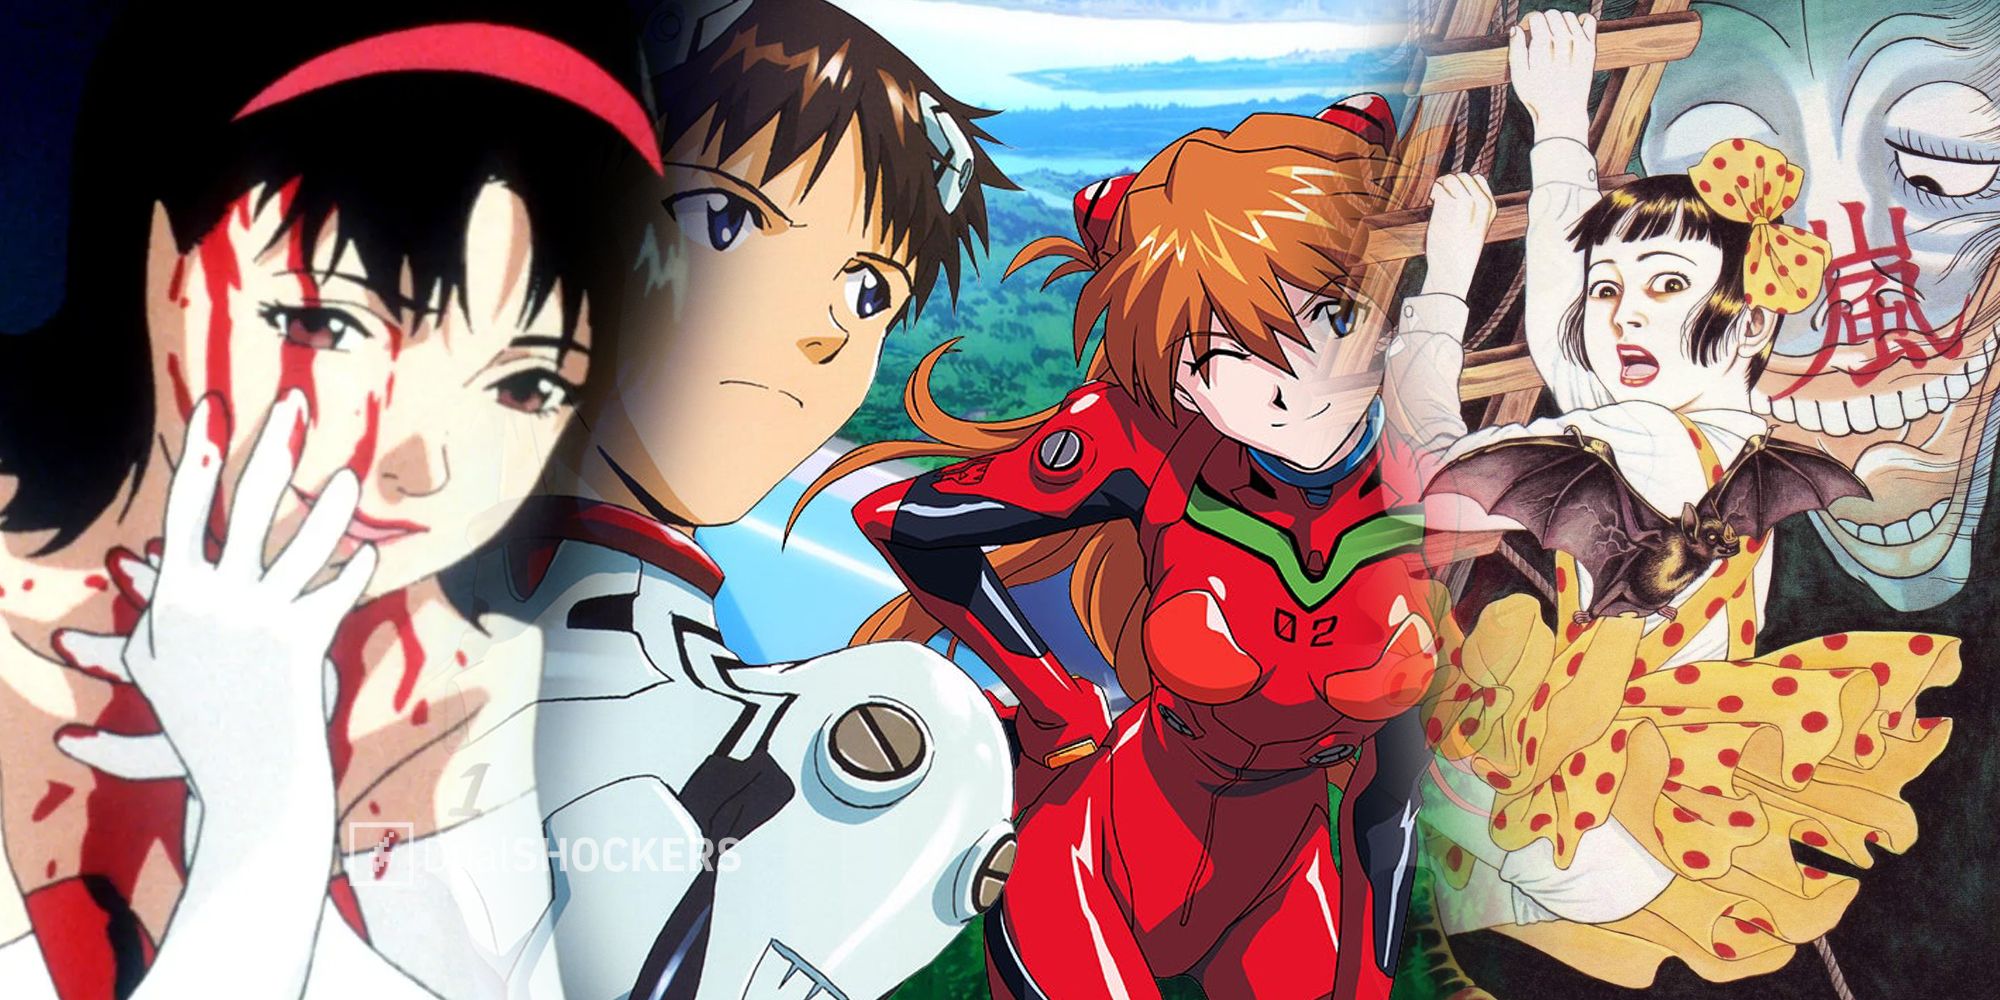 Psychological Anime: 12 Series You Should Watch - But Why Tho?